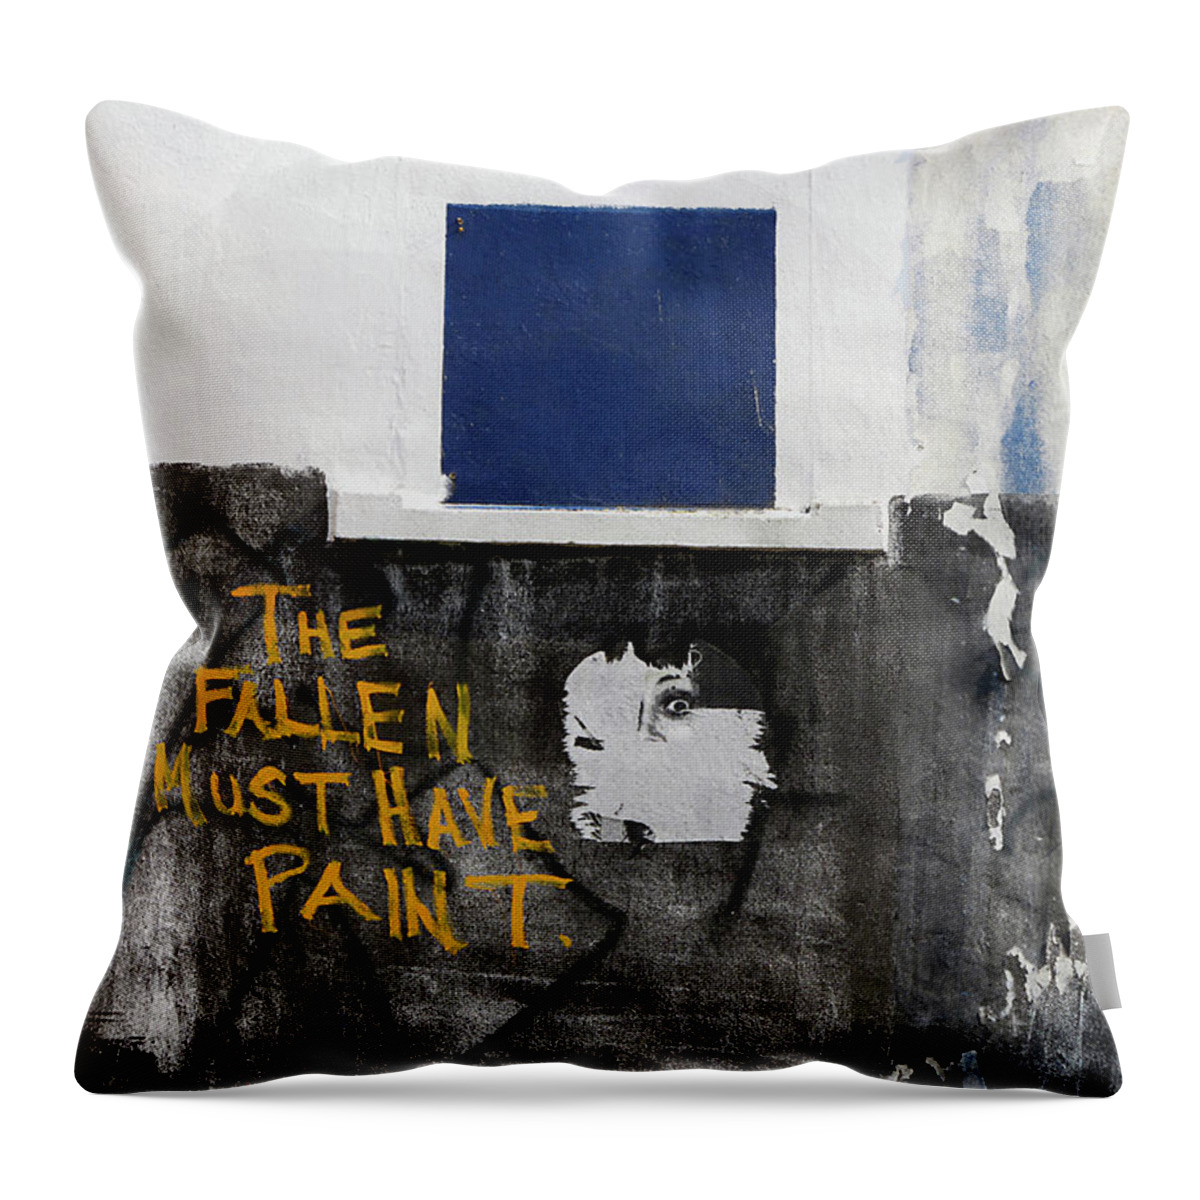 Mural Throw Pillow featuring the photograph The Fallen Must Have Paint by JoAnn Lense